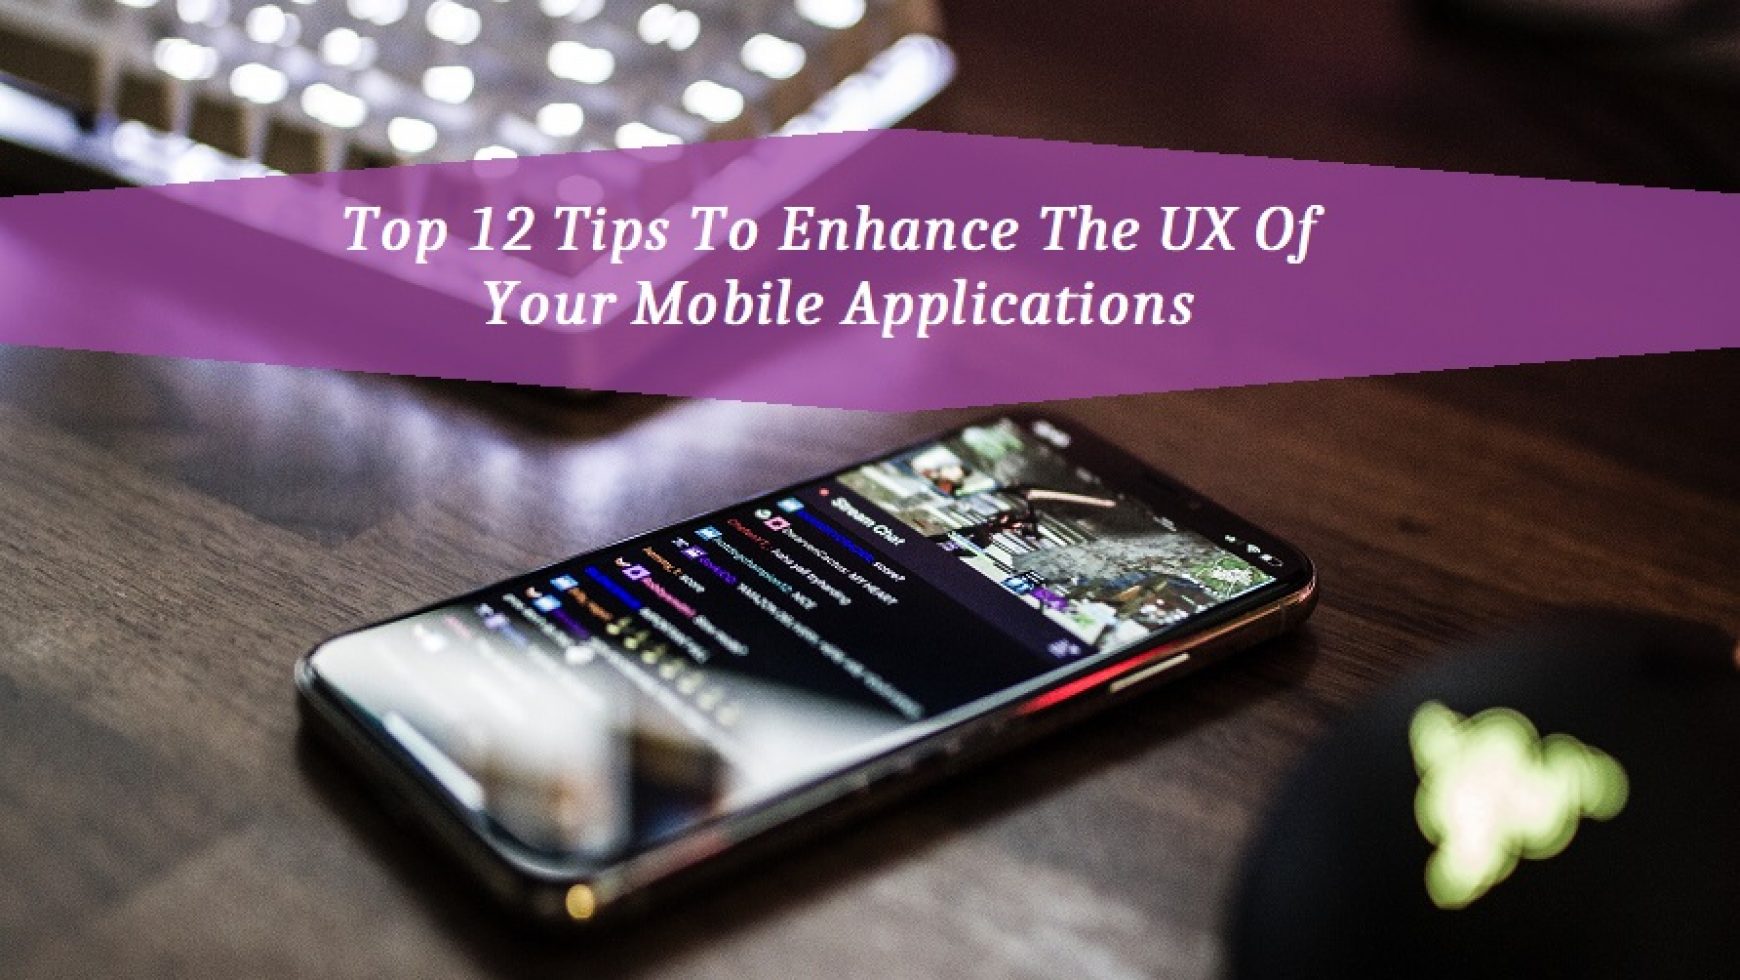 Top 12 Tips To Enhance The UX Of Your Mobile Applications